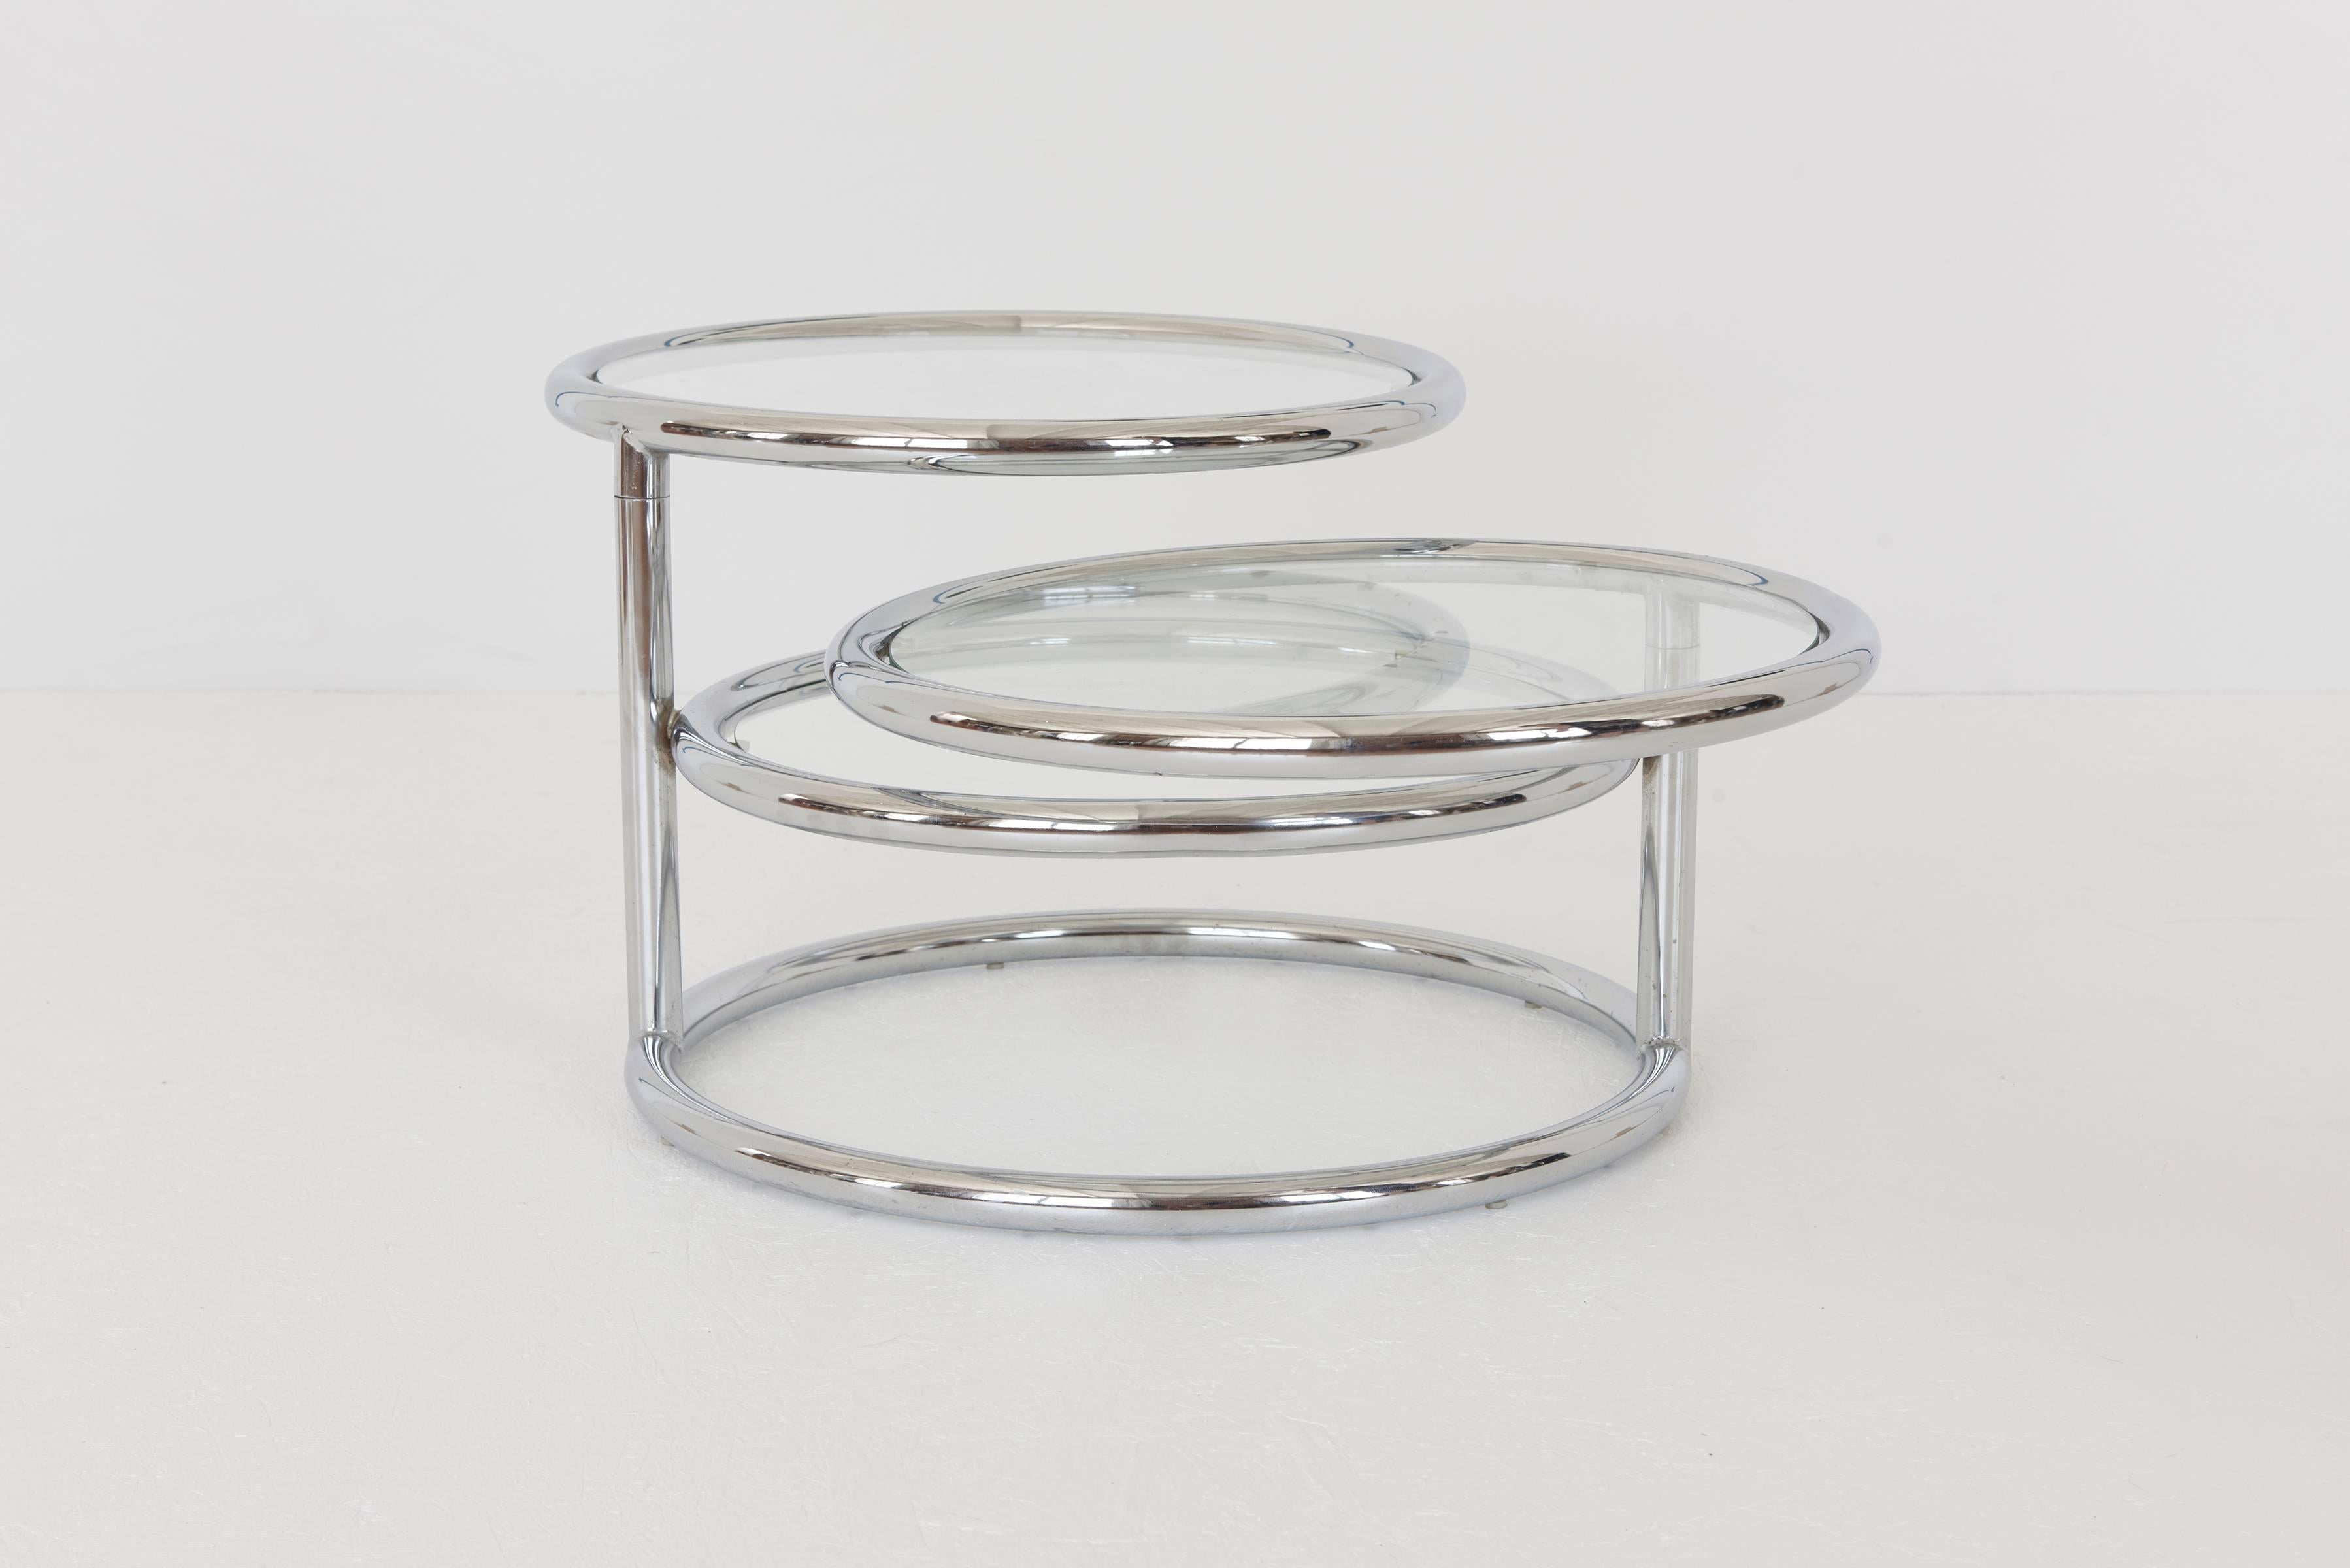 Adjustable multi-tier coffee table with two circular sections that swivel out to extend the table. Table is comprised of tubular chrome-plated metal frame and clear glass tops (3 surfaces). Table extends to 66 in. wide.